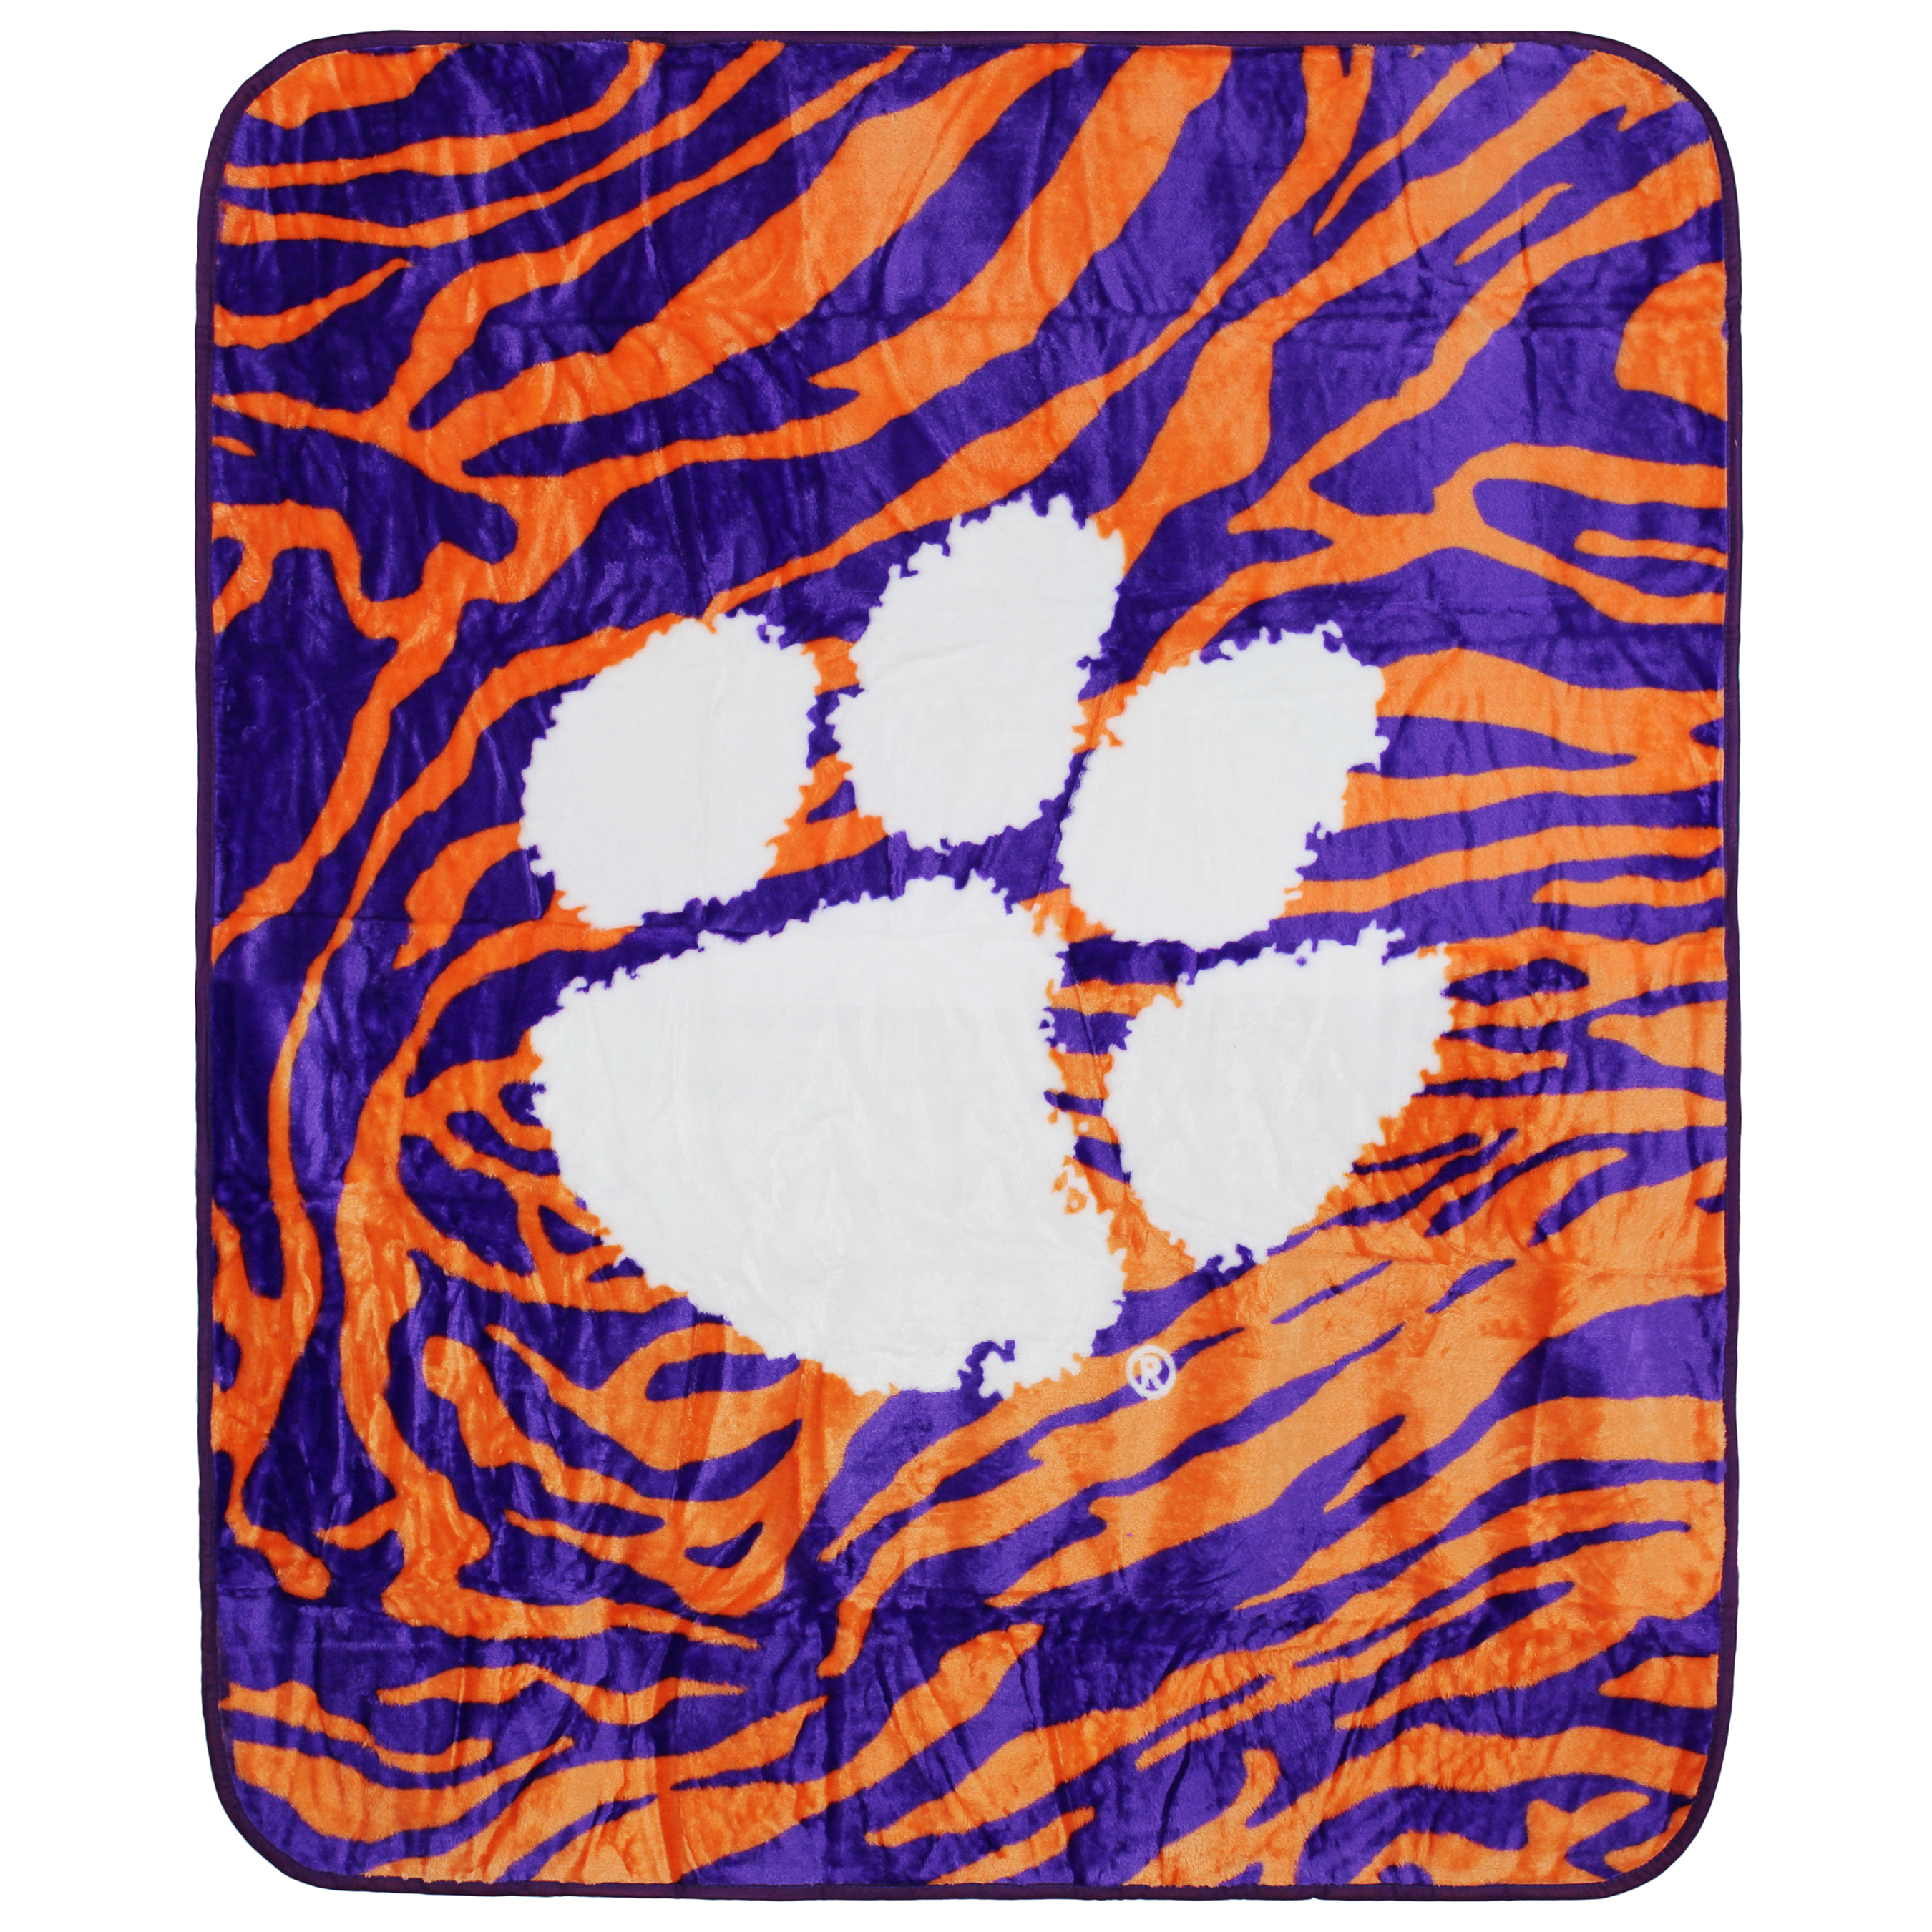 College Covers Everything Comfy Clemson Tigers Soft Raschel Throw Blanket, 60" x 50" - image 1 of 8